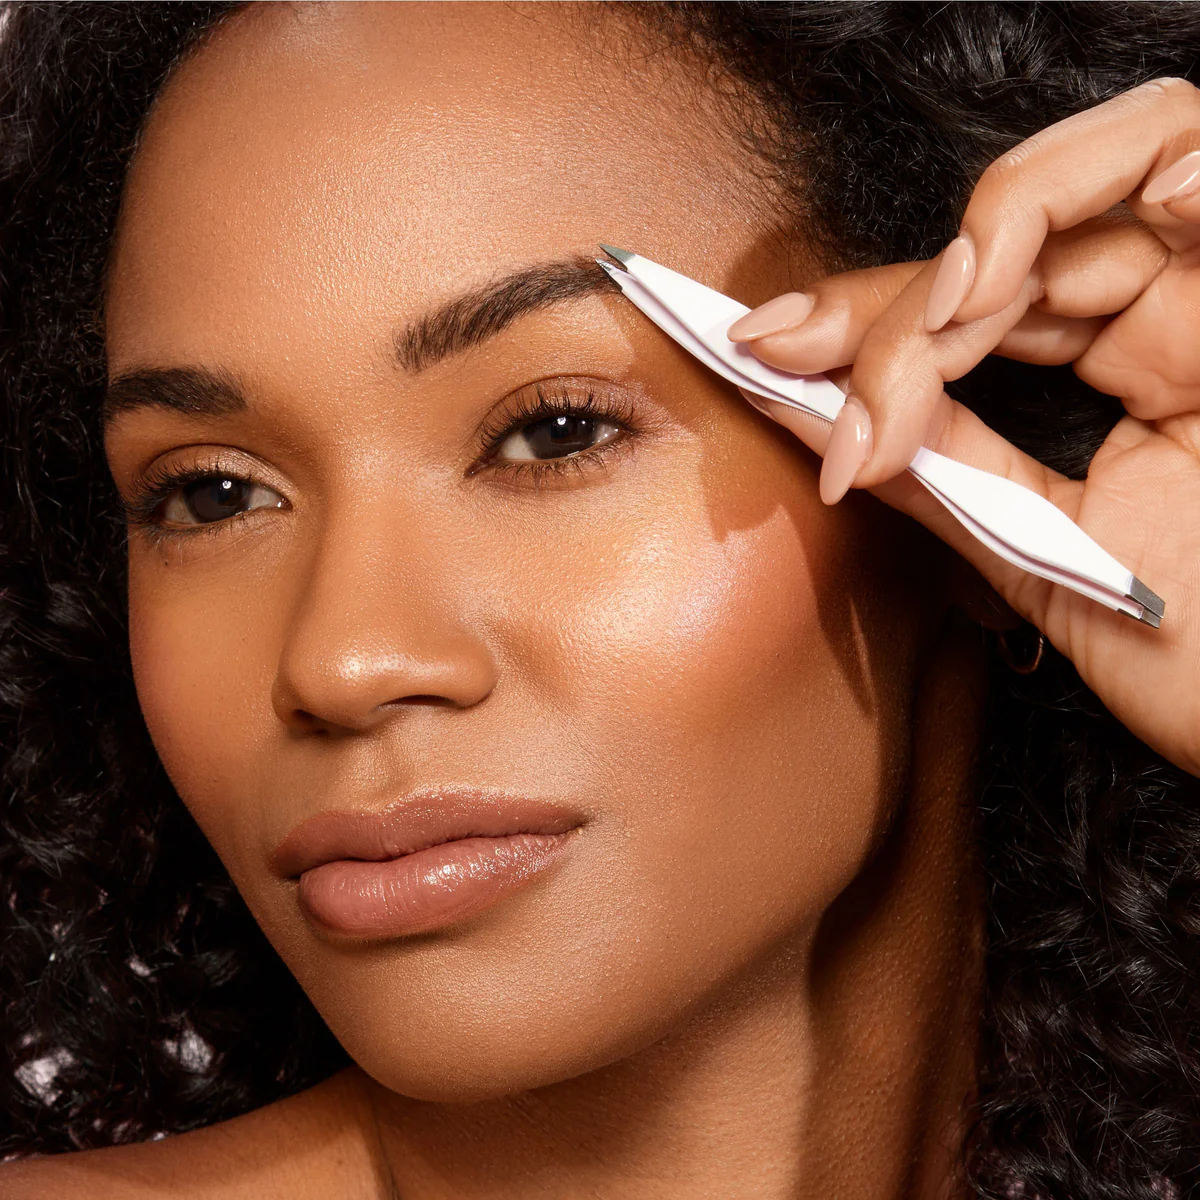 Real Techniques-Brow Shaping Set